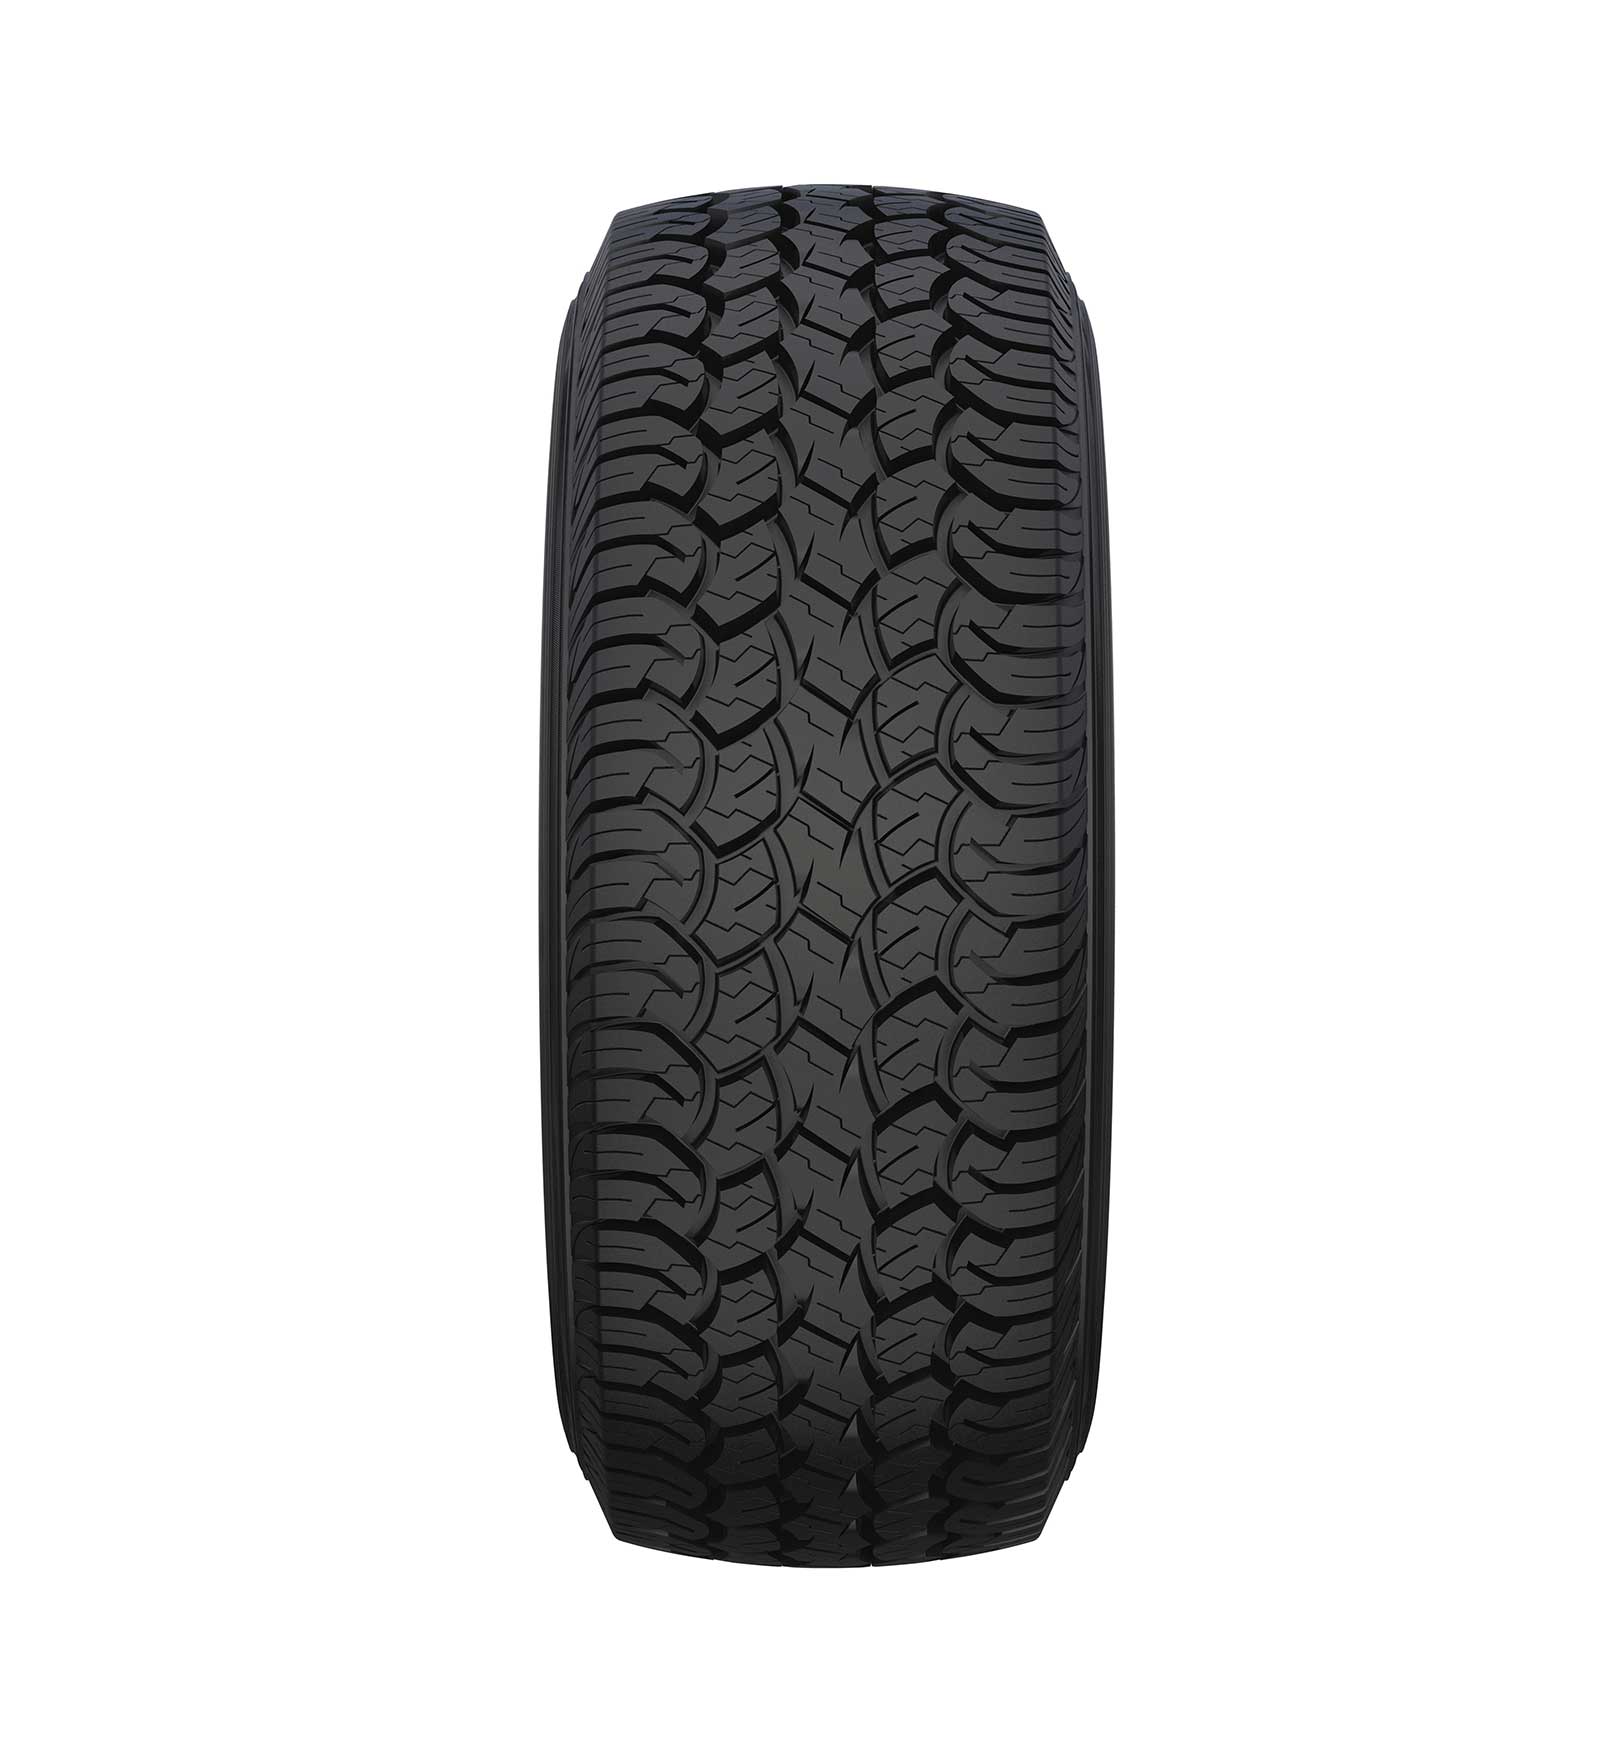 P215/70R16 100T FEDERAL COURAGIA A/T O.W.L.